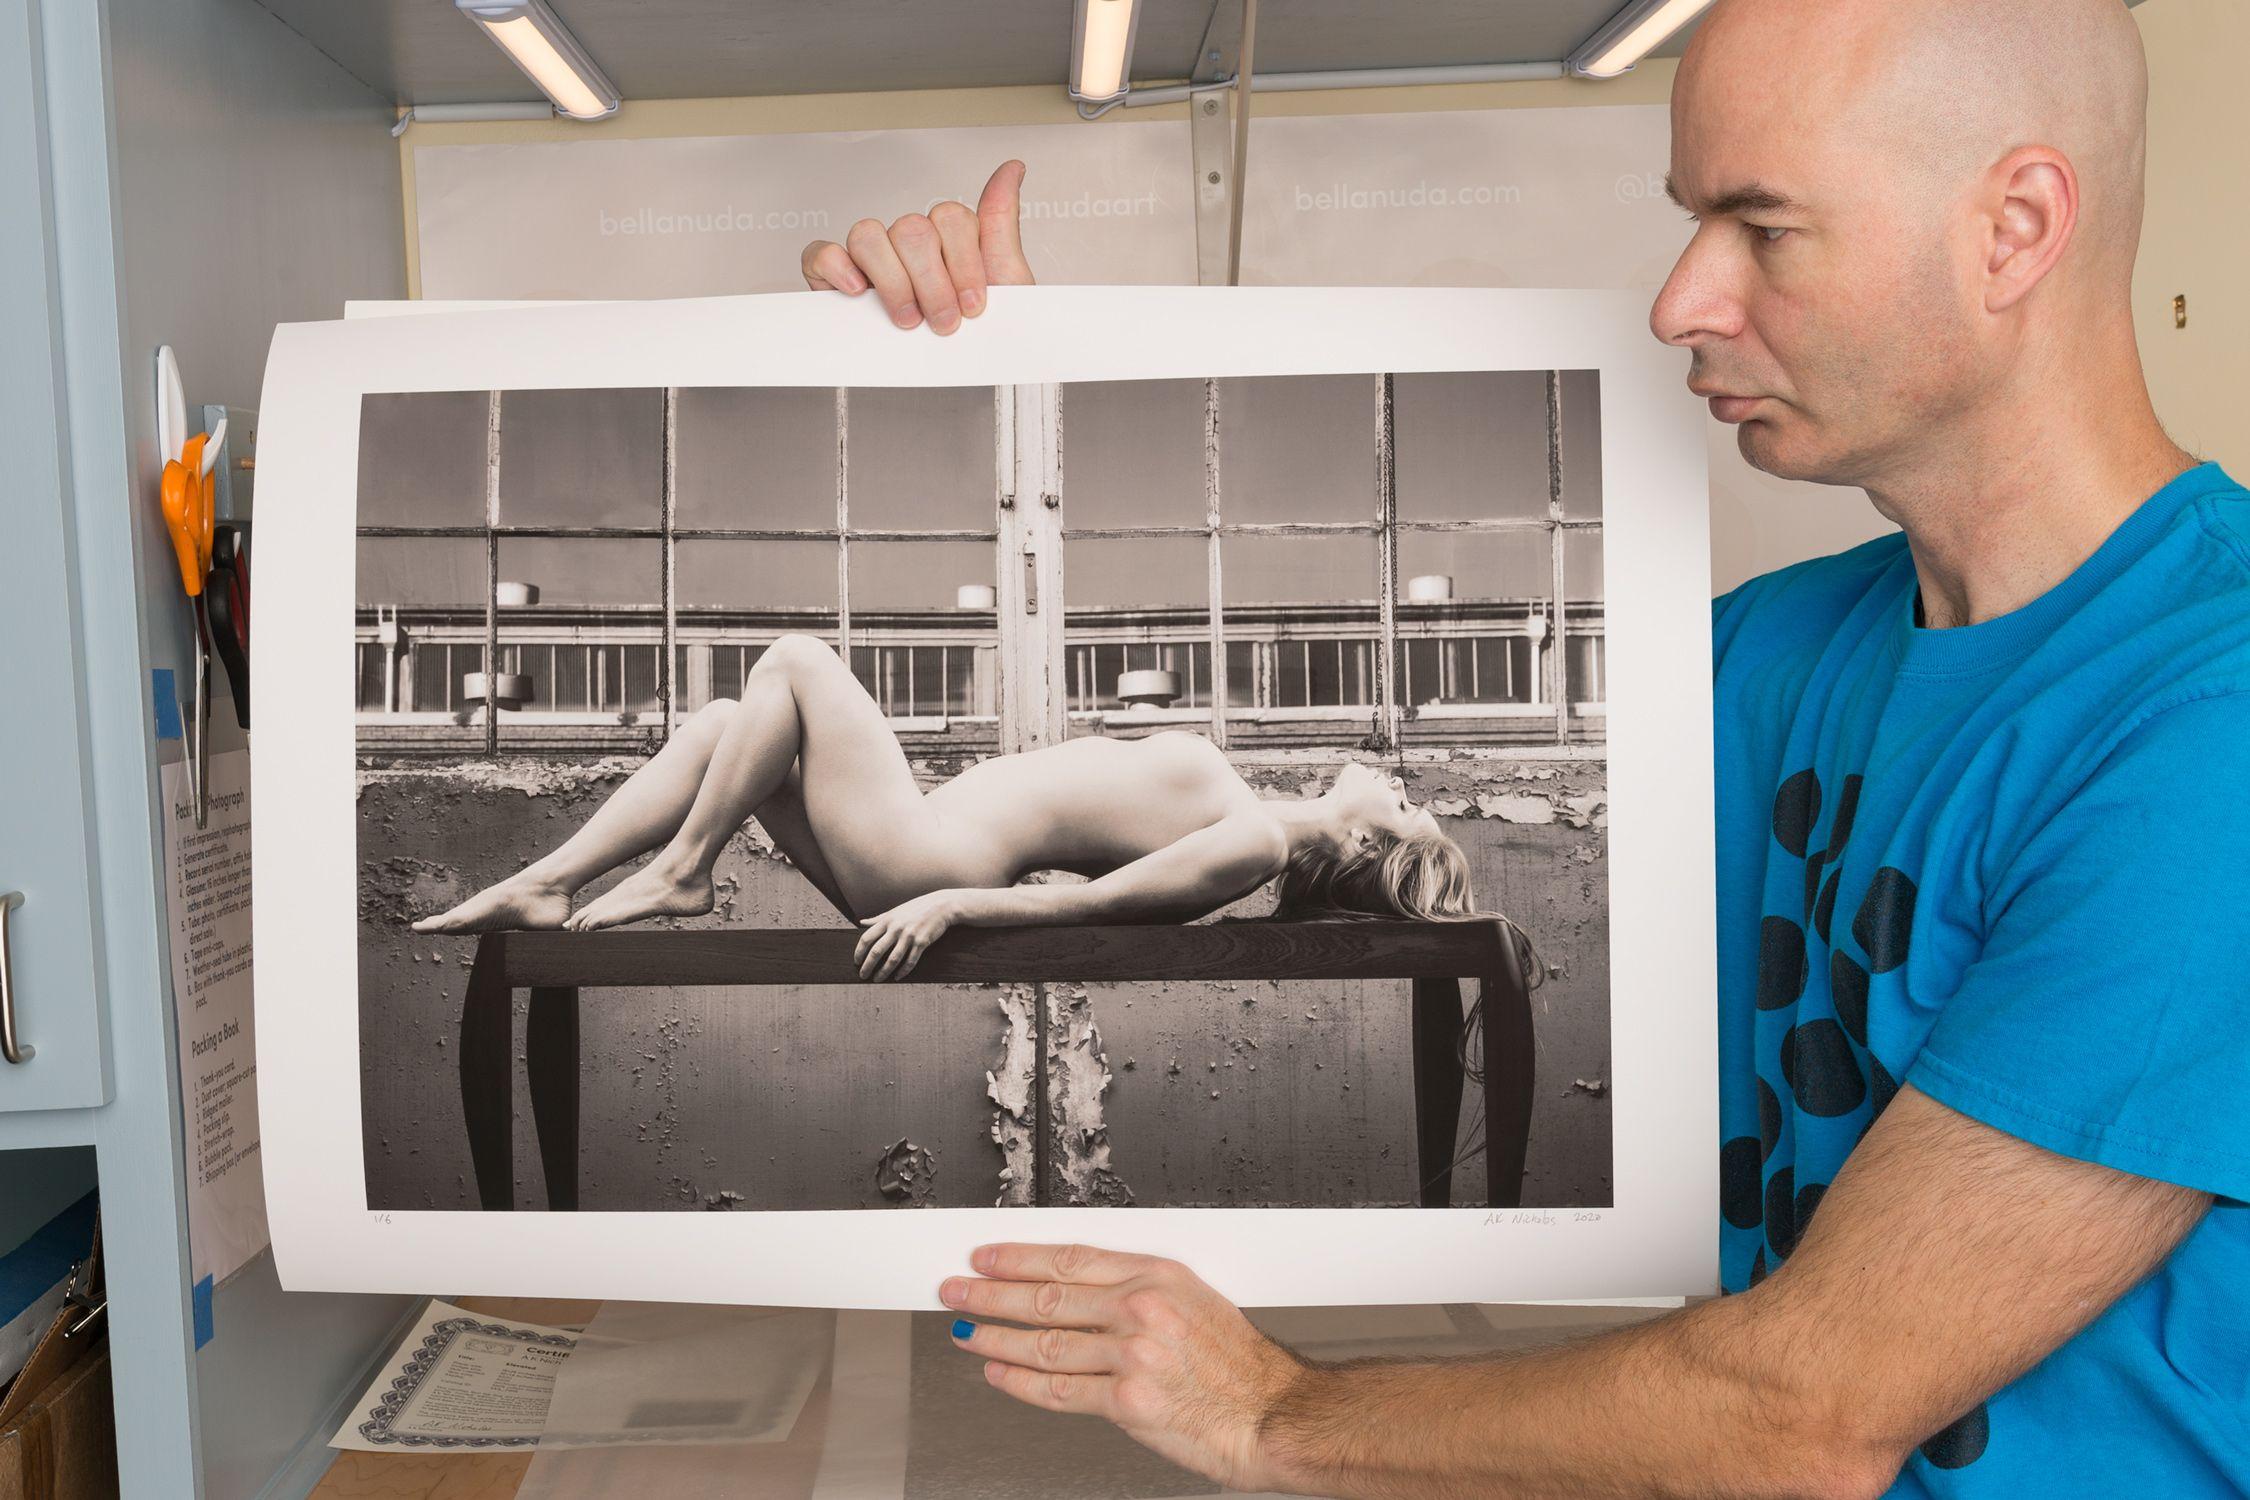 From a limited edition of 6 archival photographs  Signed and numbered by artist Aaron Knight.  Art-ID: EK4_7966    Aaron Knight is an American visual artist who creates photography in an unapologetic celebration of the female nude. His sensual,